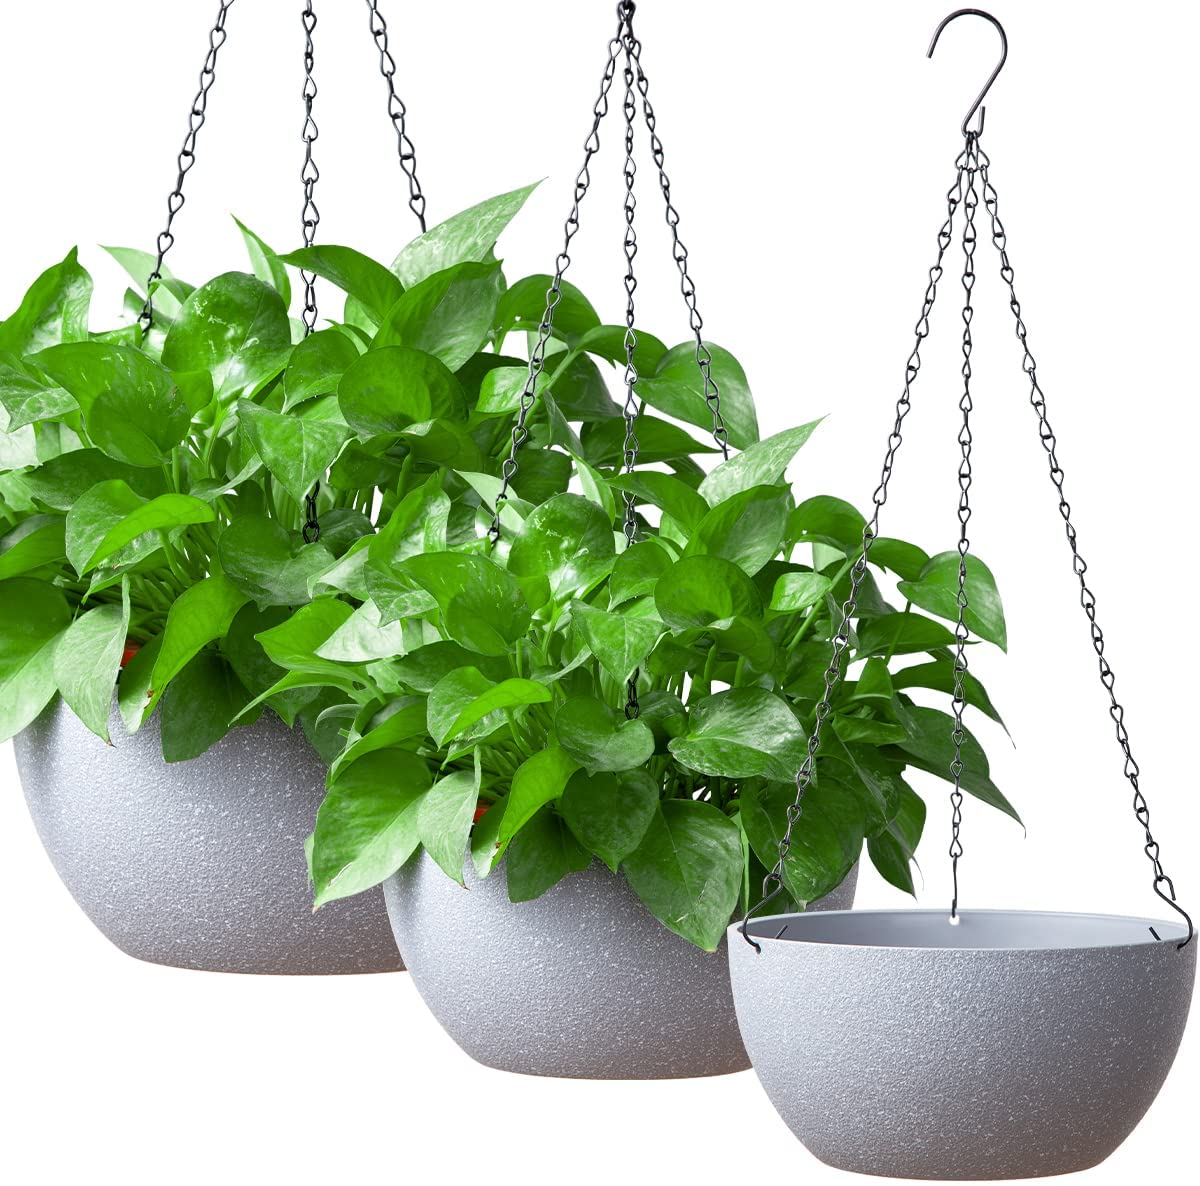 3 Pack Hanging Planters Hanging Pots Baskets for Plants Indoor Outdoor Modern Flower Pots with Drainage, Plastic Planters Speckled Hanging Plants Holder 8/9/10 Inch with Three Extra Ropes